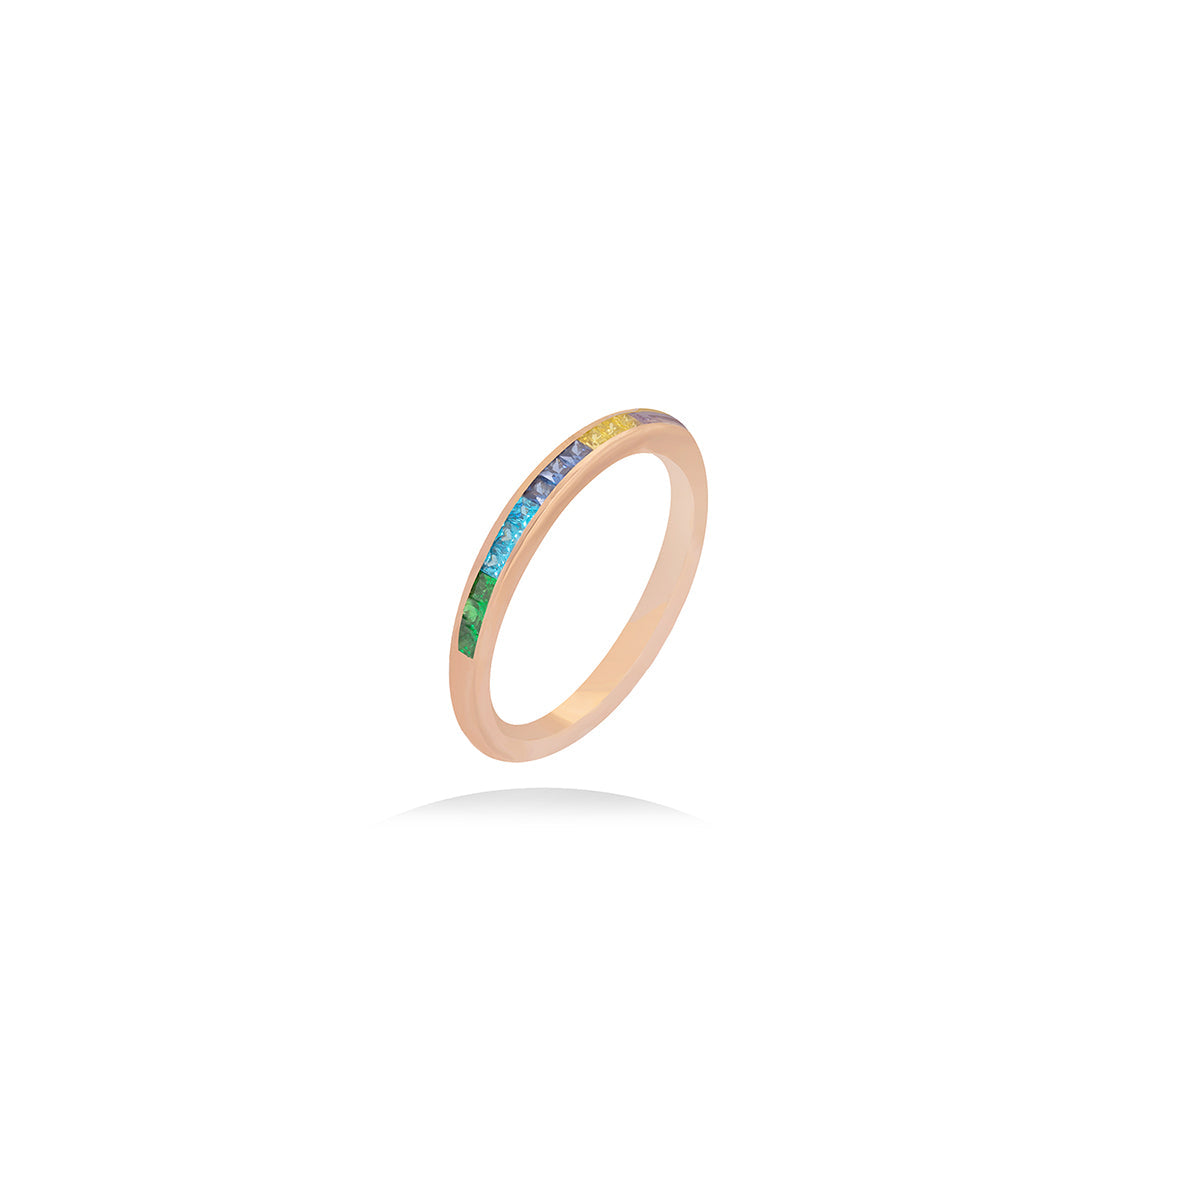 Engagement Band Ring In 18K Inlaid With Colorful Gem Stones - Yellow Gold